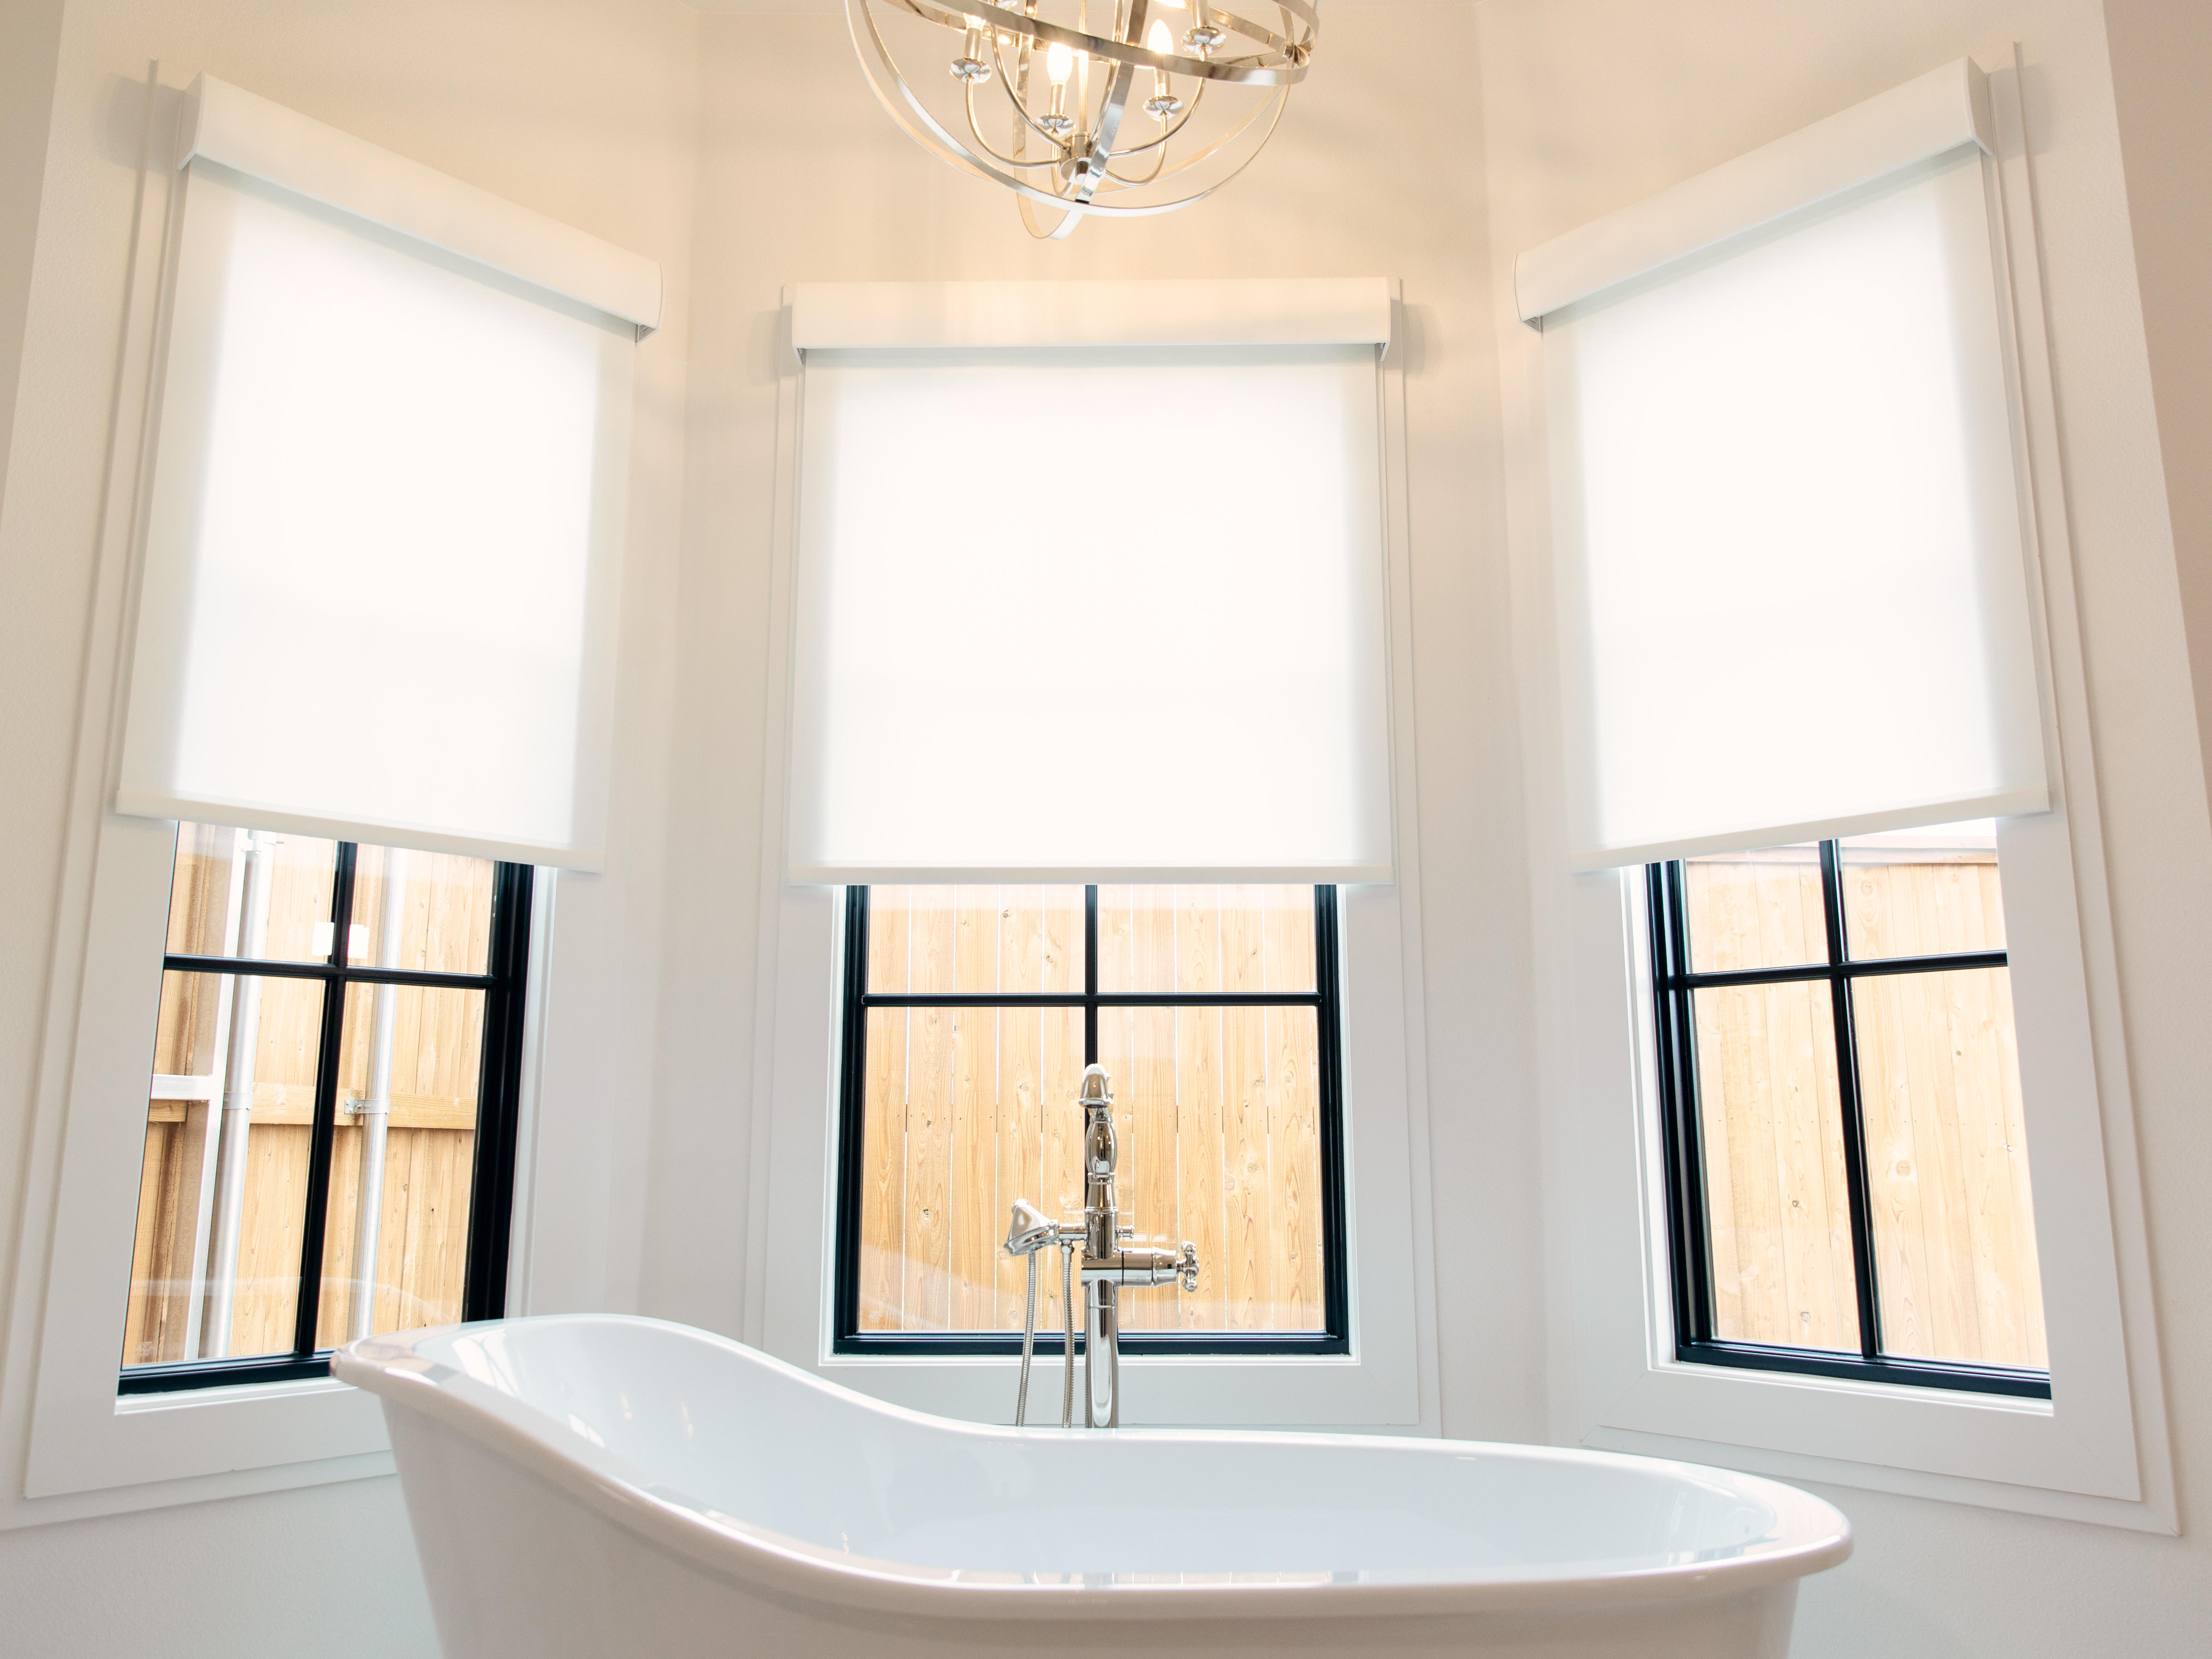 Motorized roller shades in the bathroom